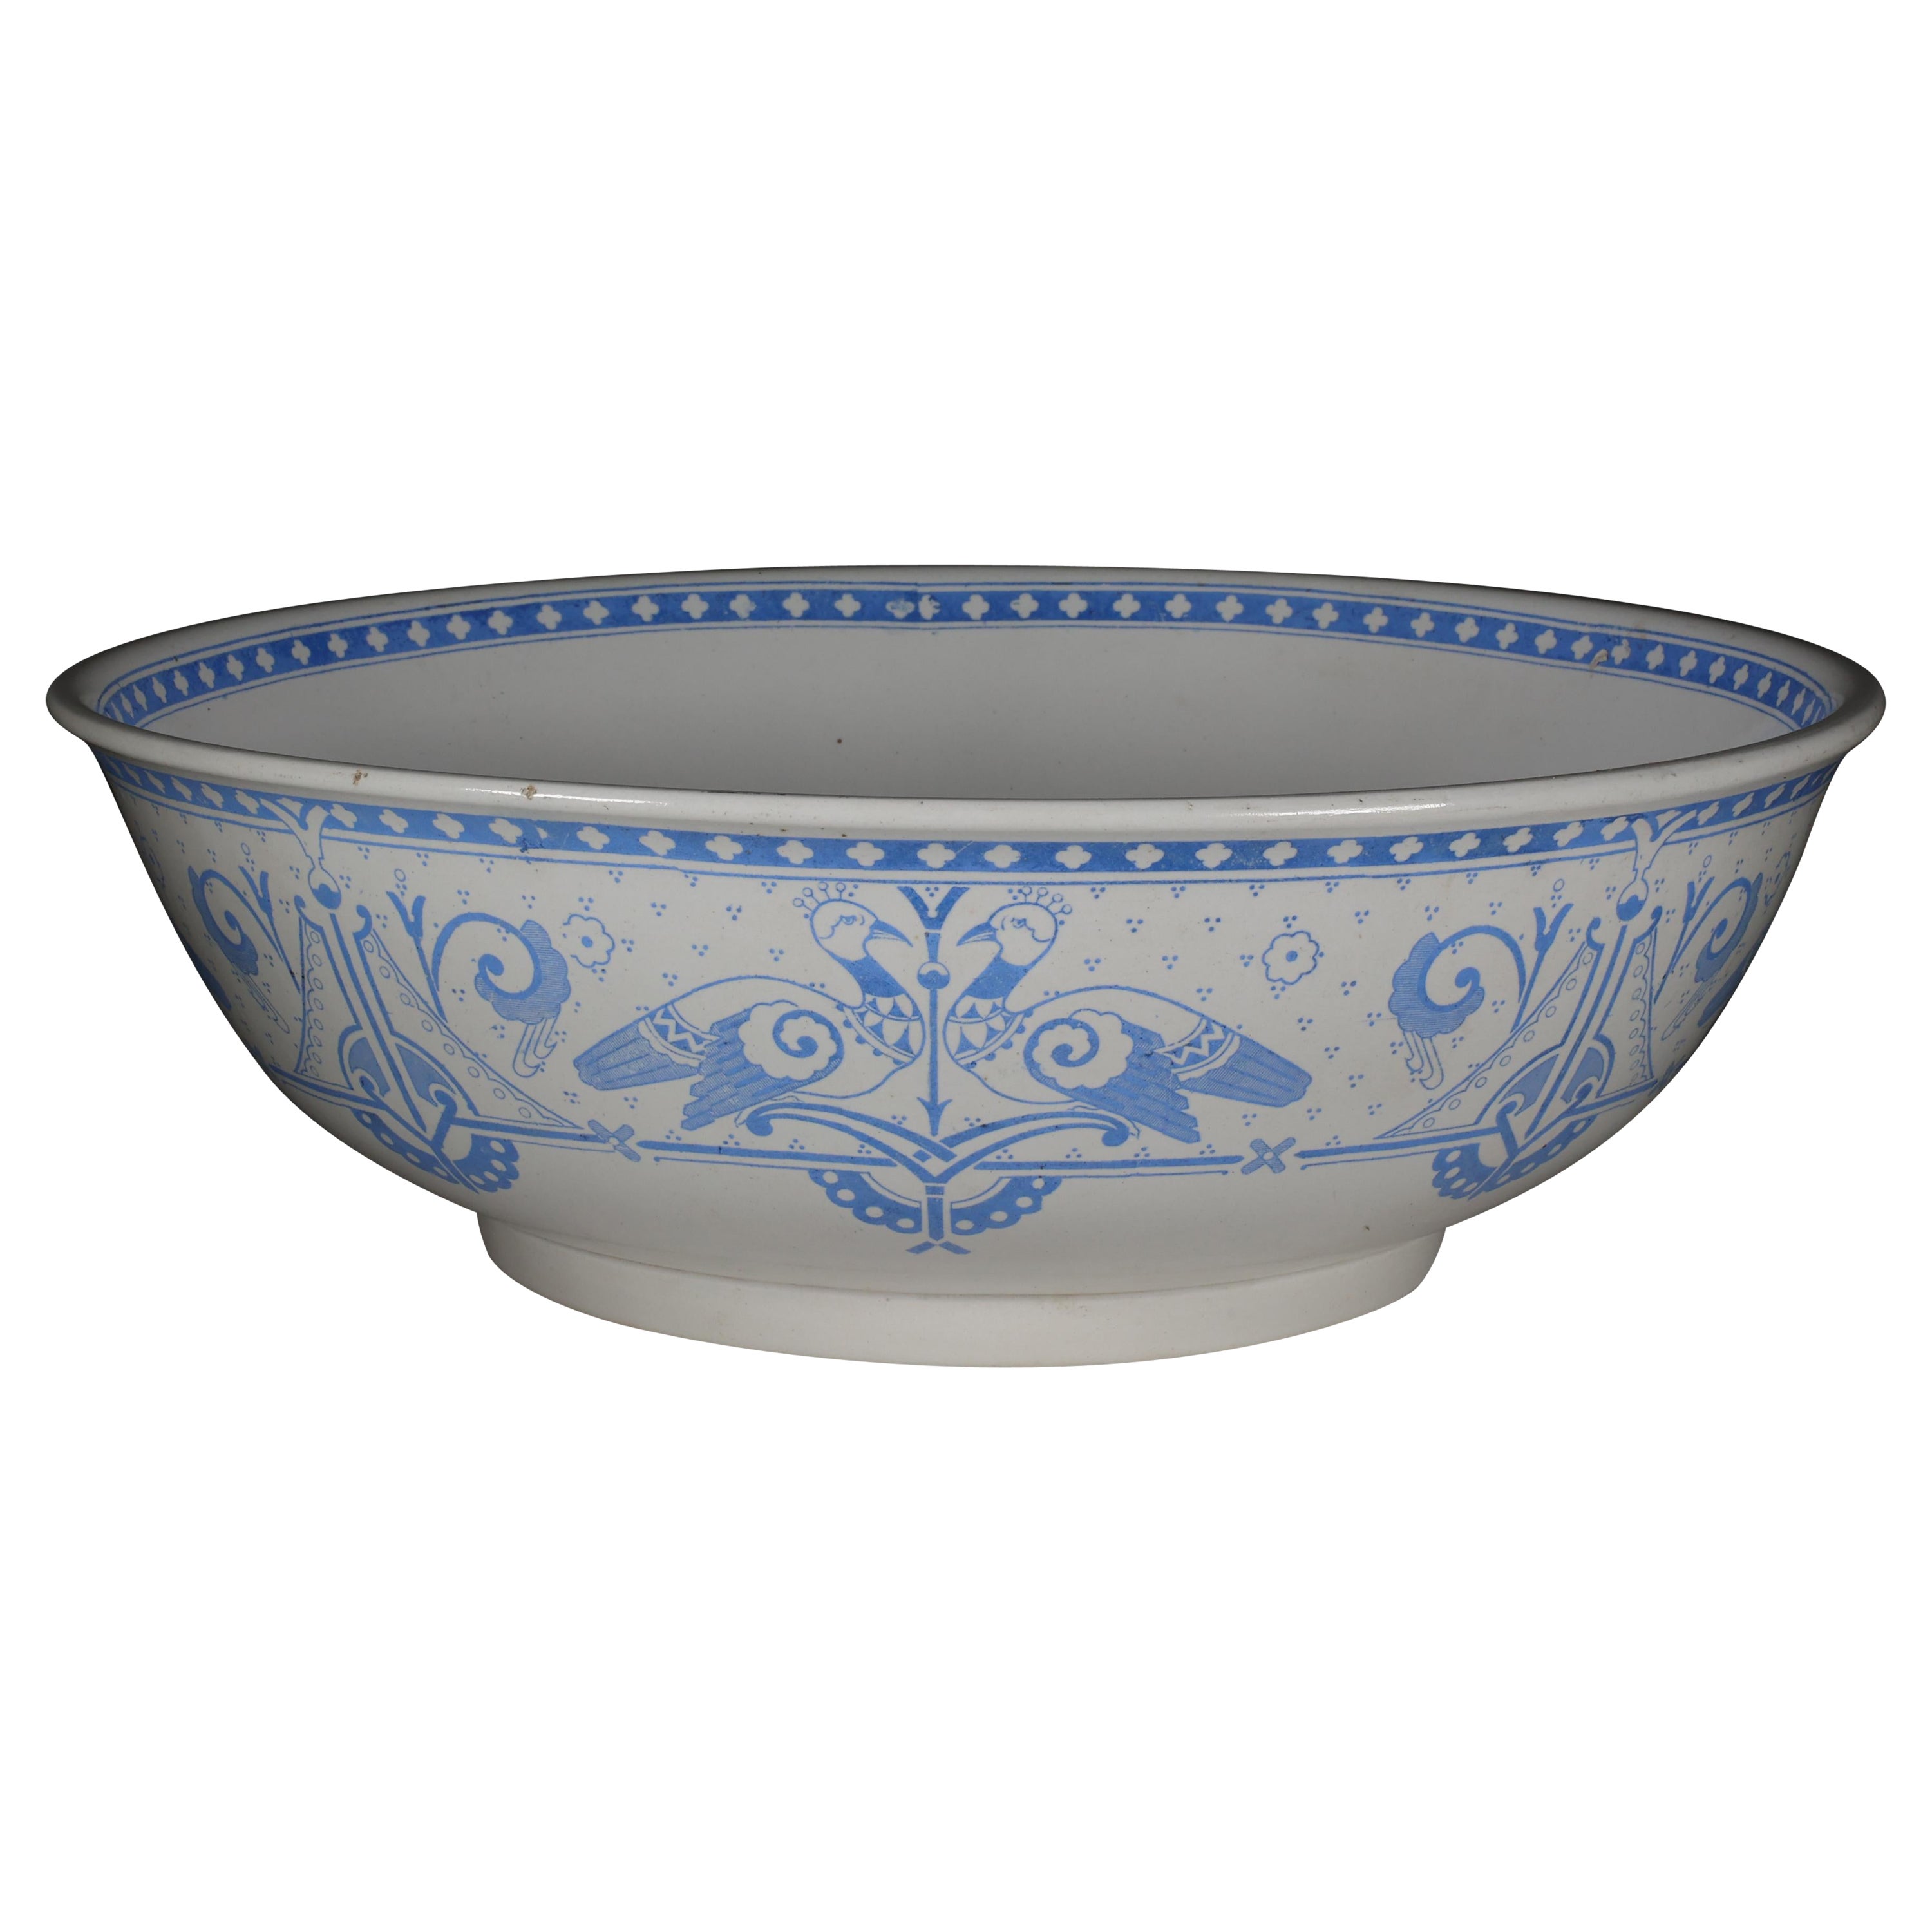 Brownfield & Sons. Olympus pattern. Dr C Dresser style. Aesthetic Movement bowl  For Sale